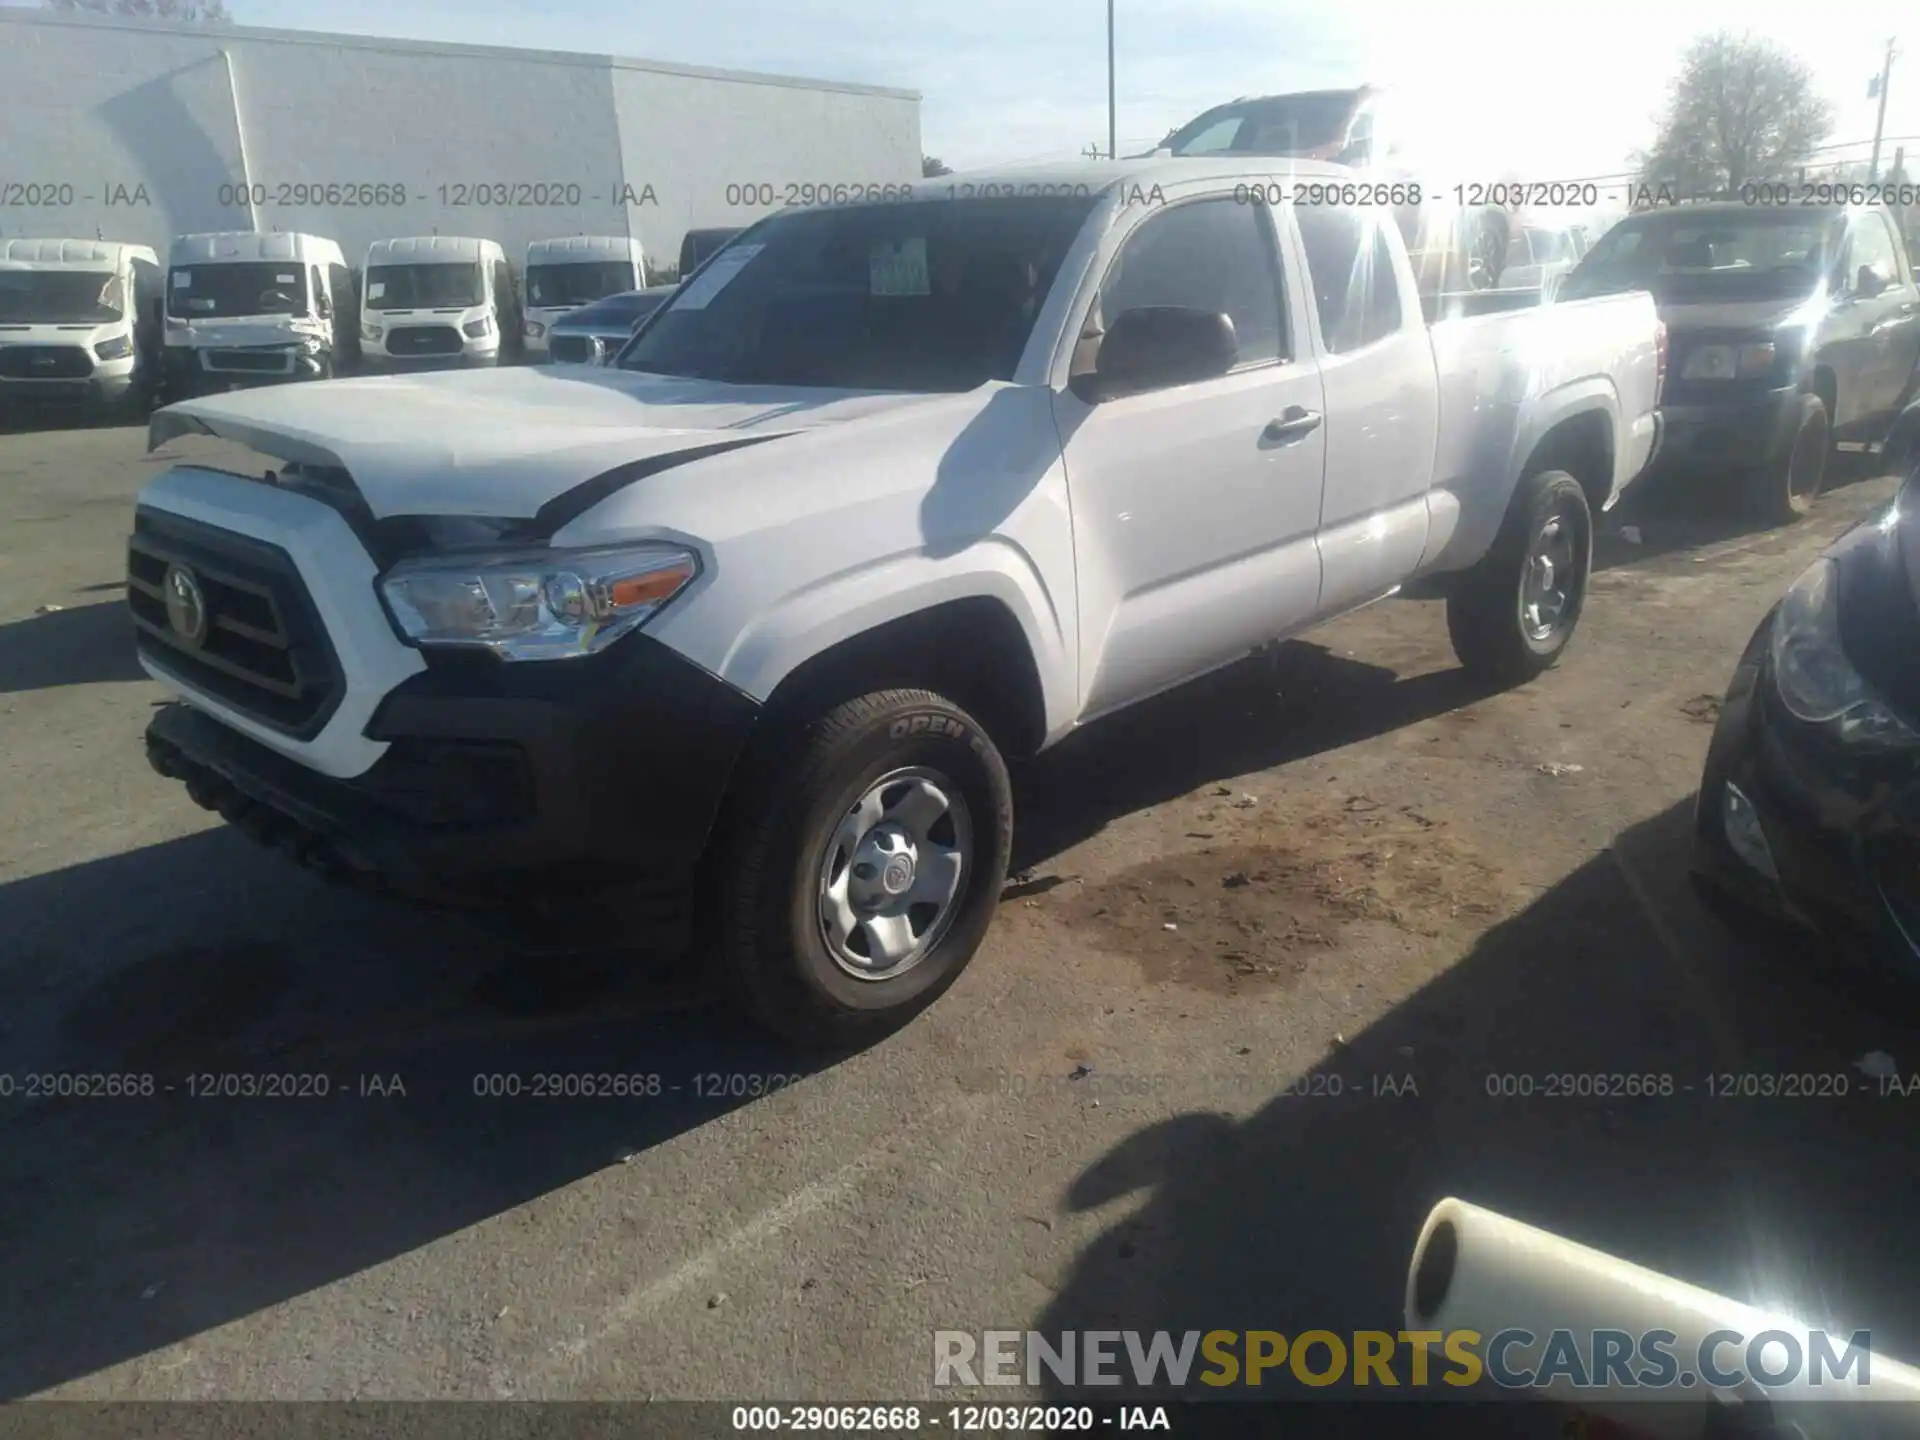 2 Photograph of a damaged car 5TFSX5EN8LX072629 TOYOTA TACOMA 4WD 2020